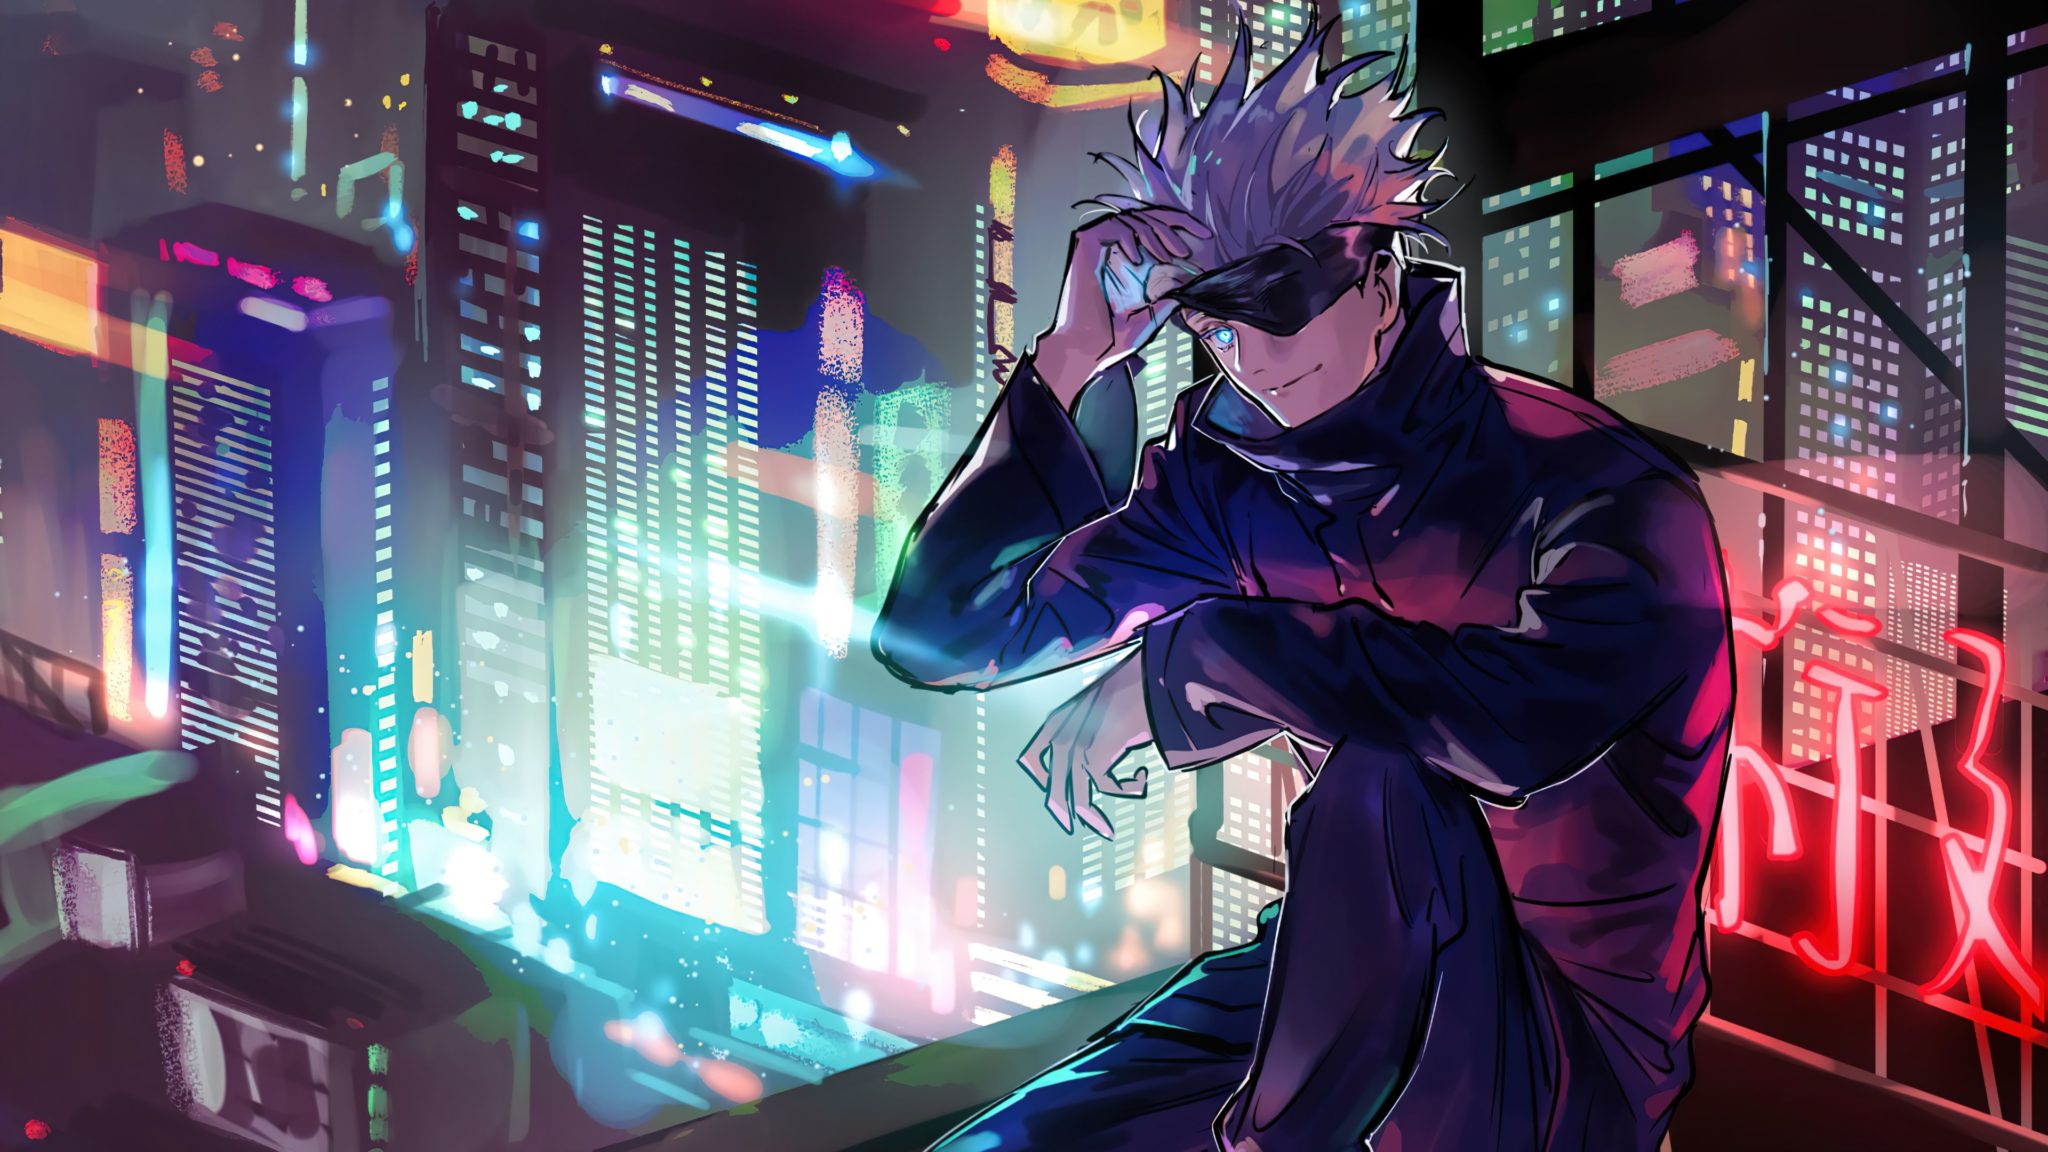 Jujutsu Kaisen Season 2: Confirm Release Date and Everything You Want